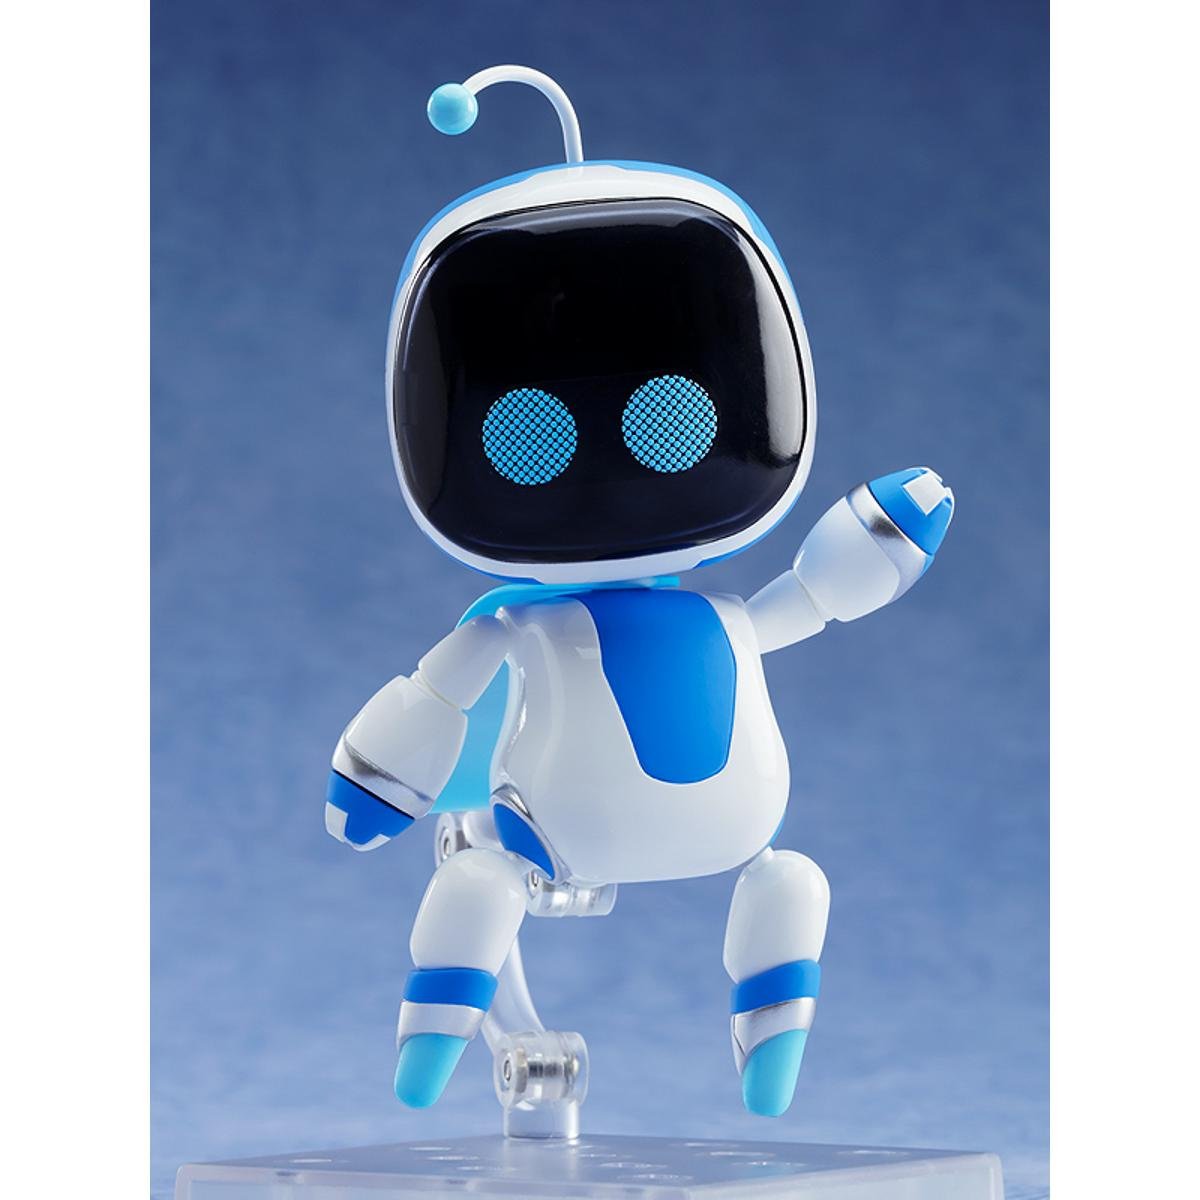 Astro Bot Gets the Nendoroid Treatment with Fantastic Figurine Push